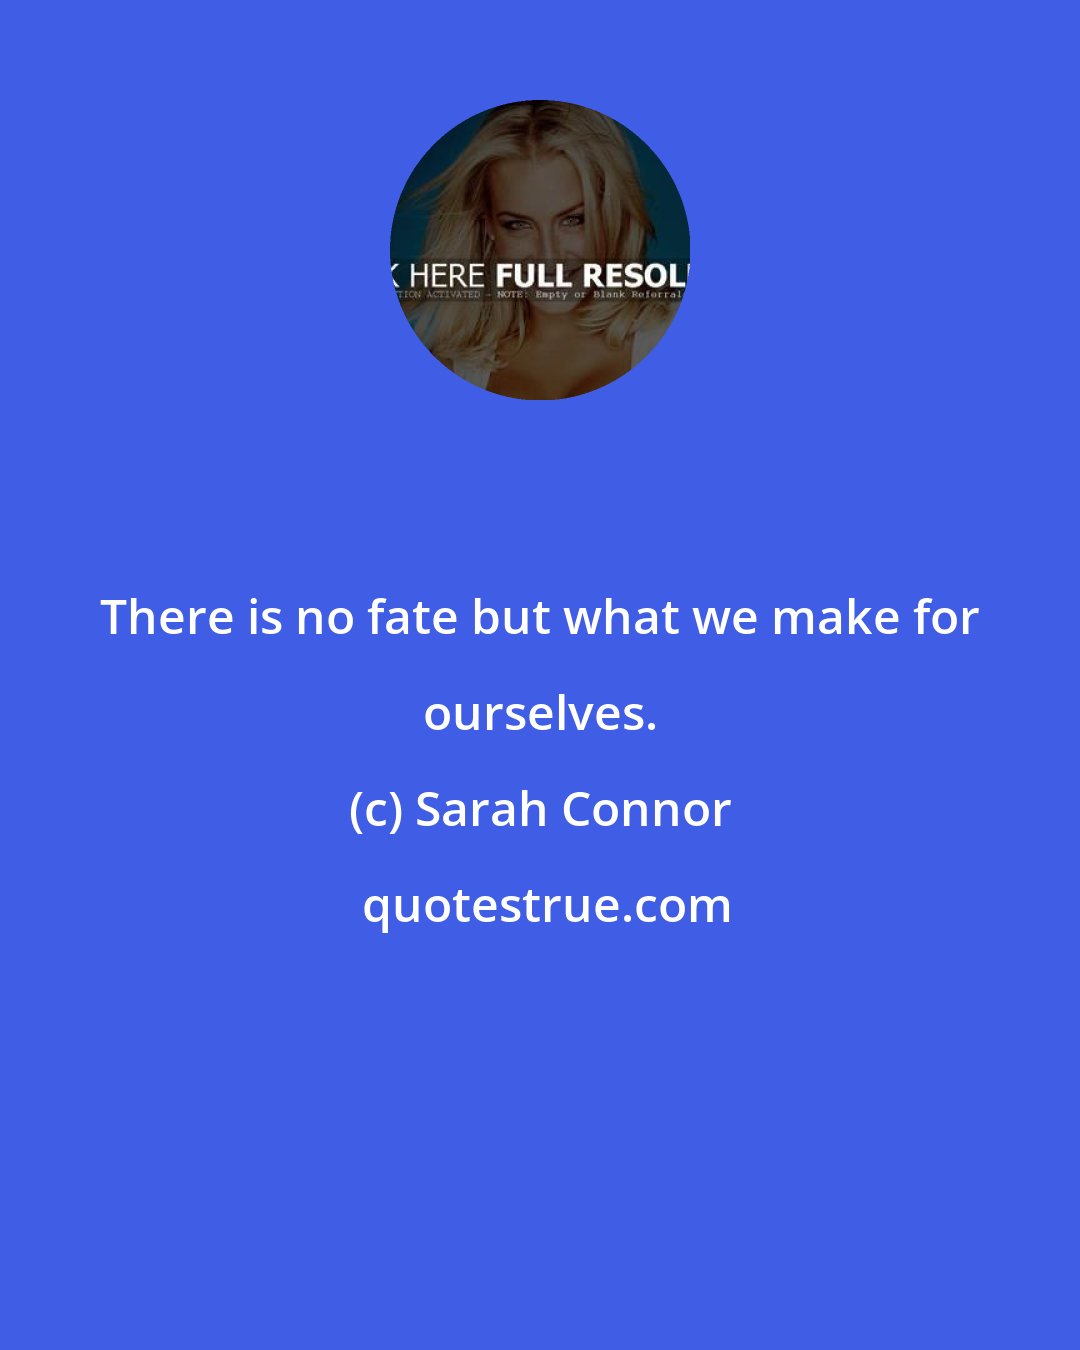 Sarah Connor: There is no fate but what we make for ourselves.